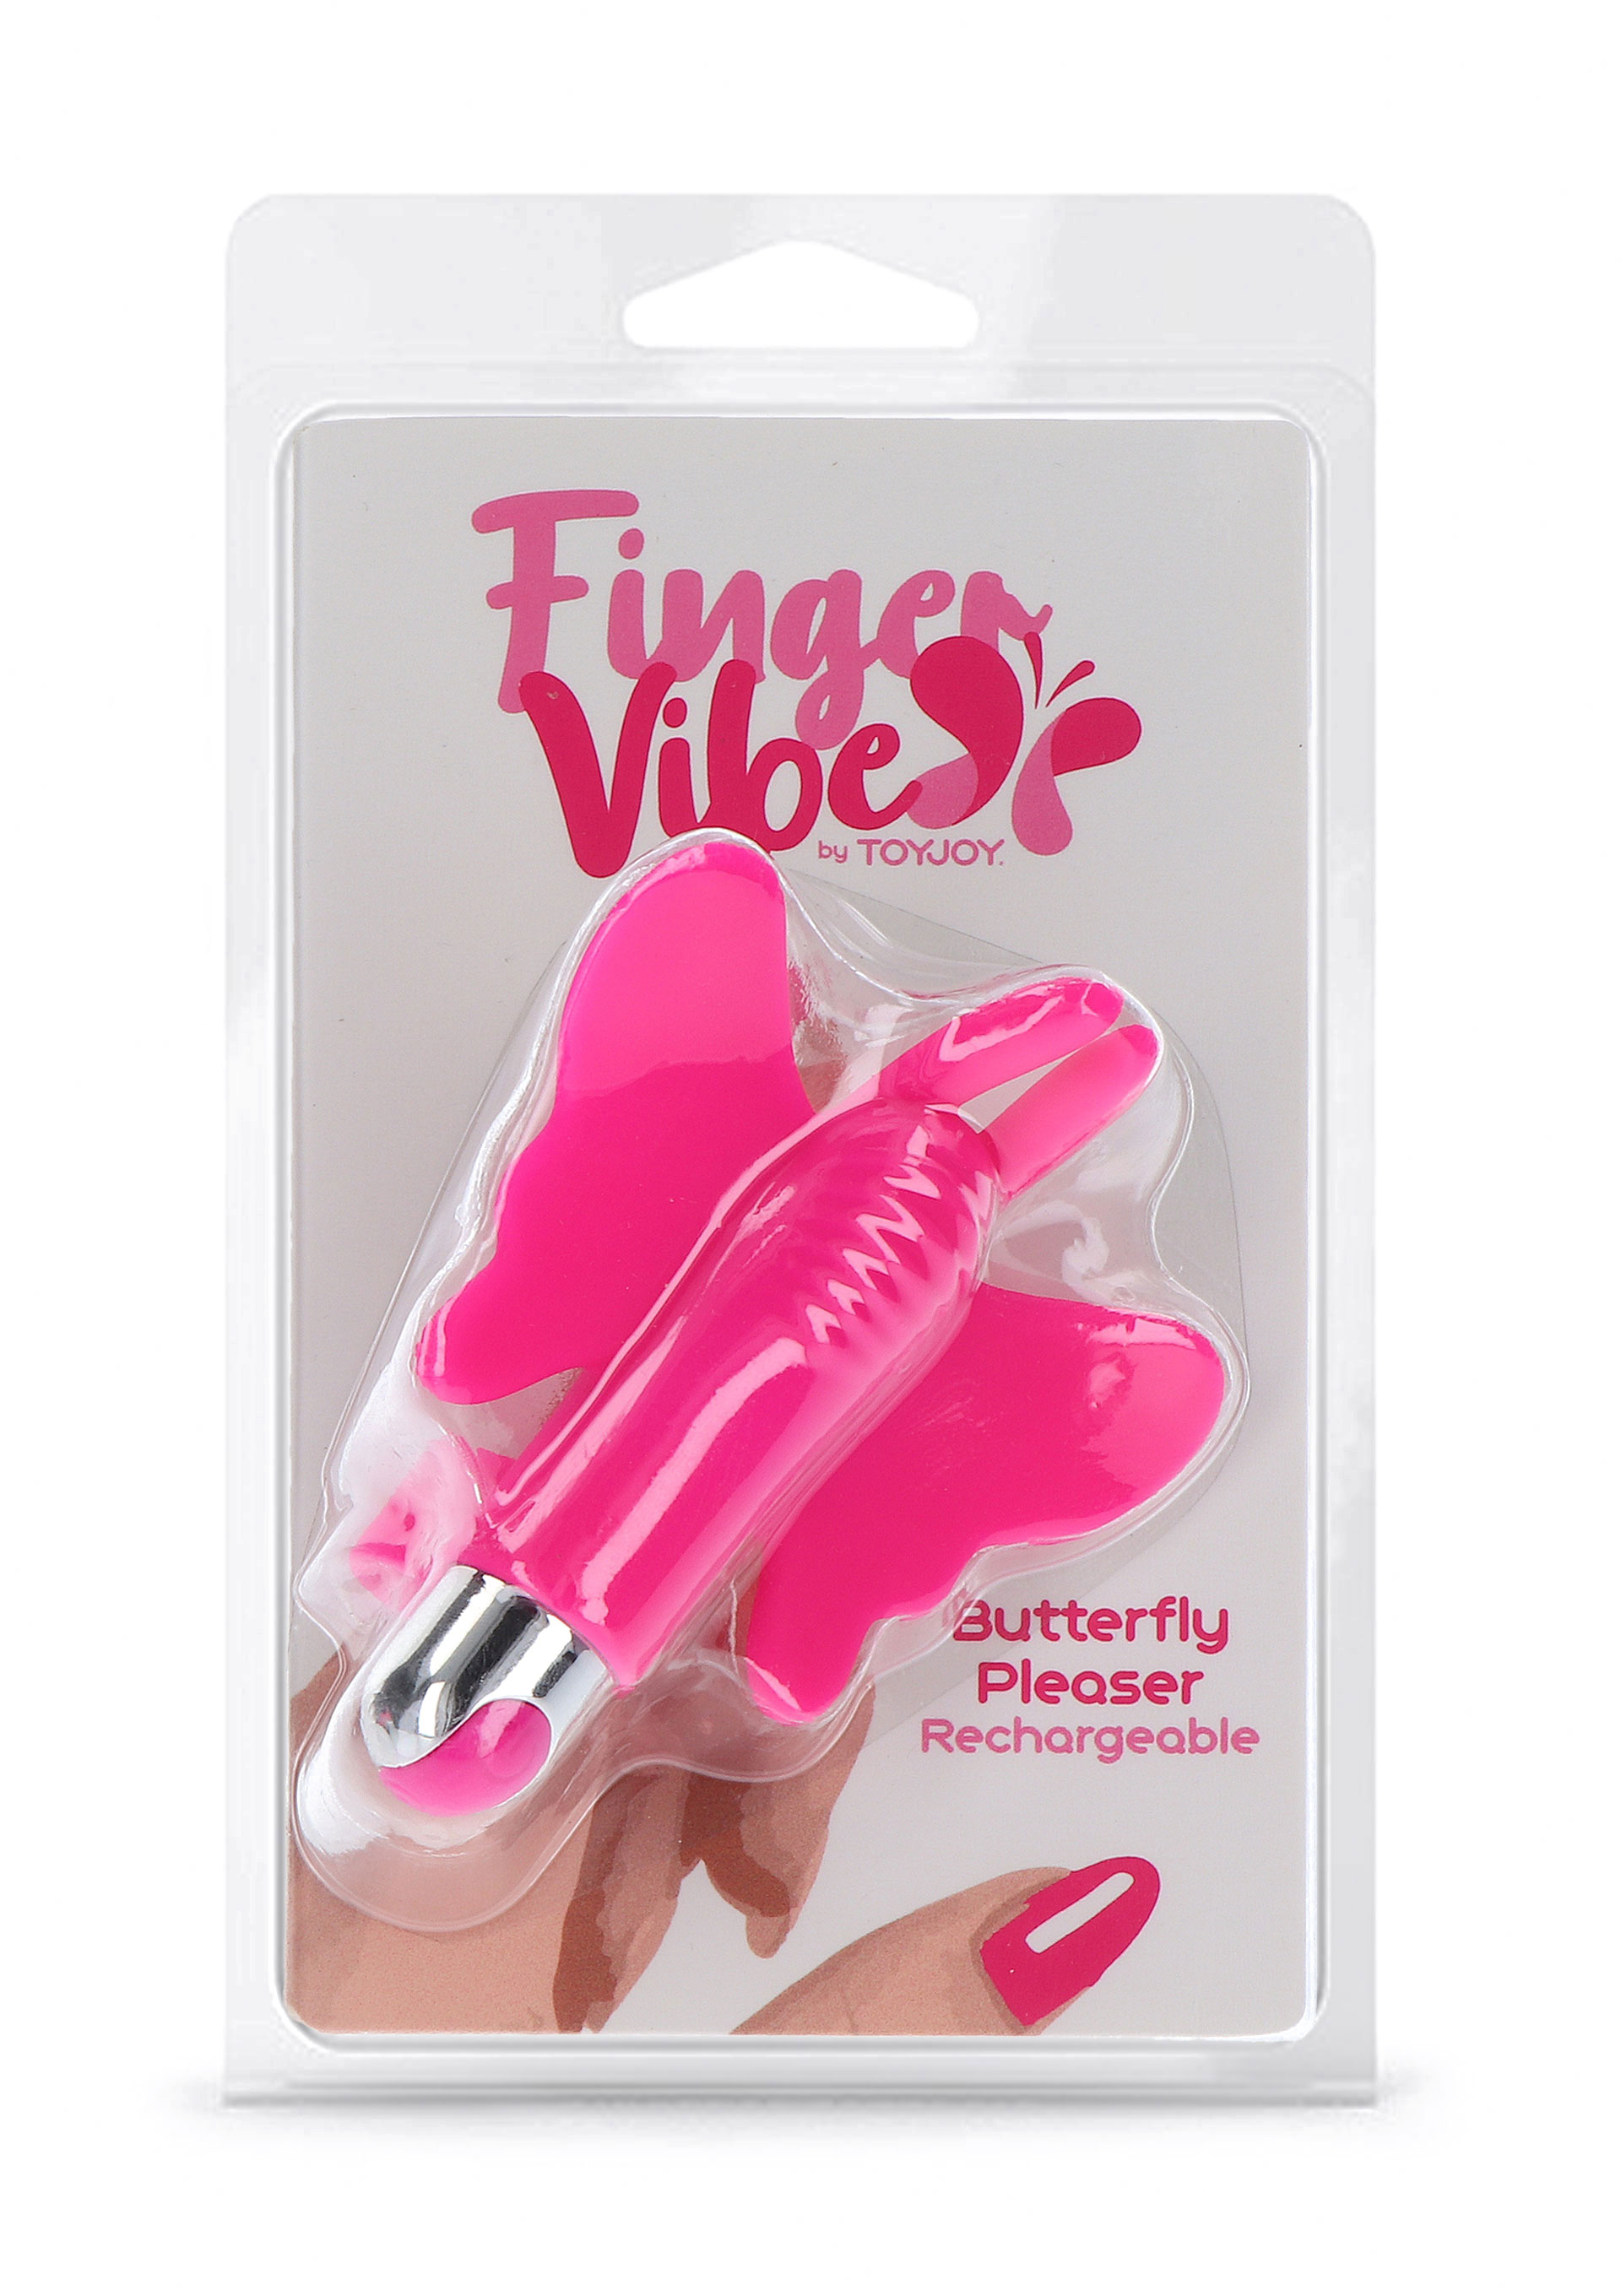 ToyJoy Fingervibes - Butterfly Pleaser Rechargeable